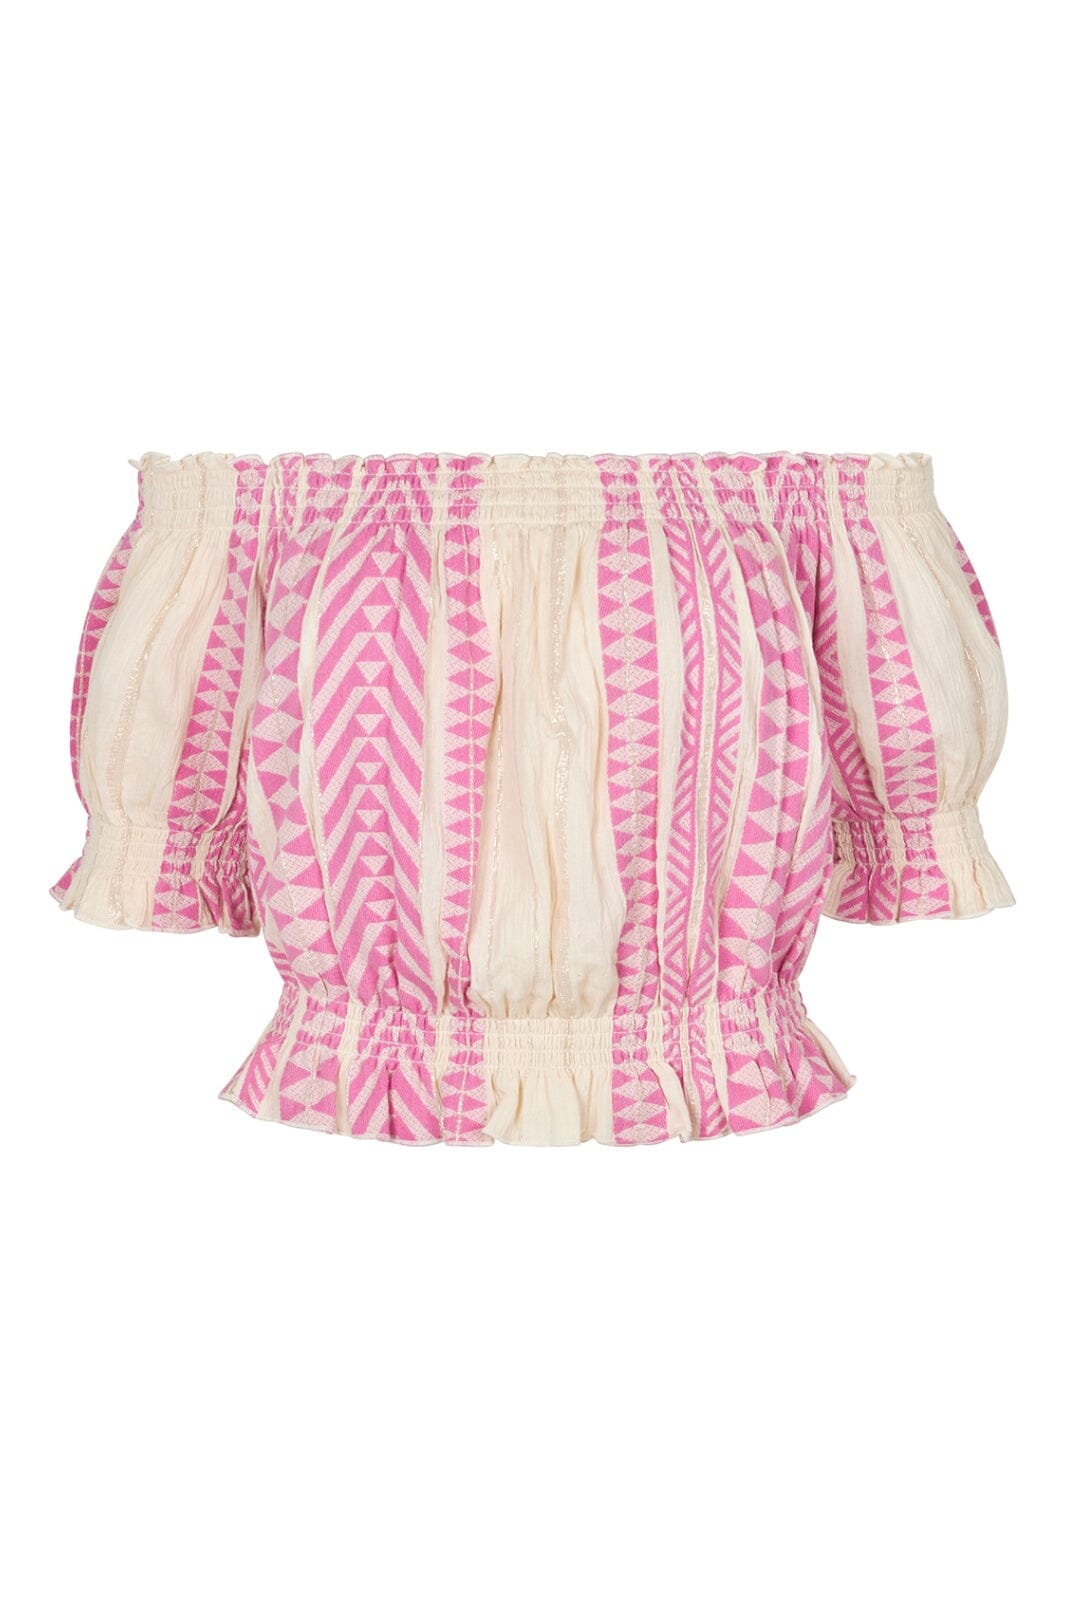 Lollys Laundry - WellsLL Top SS 24286-1048 - 51 Pink Toppe 